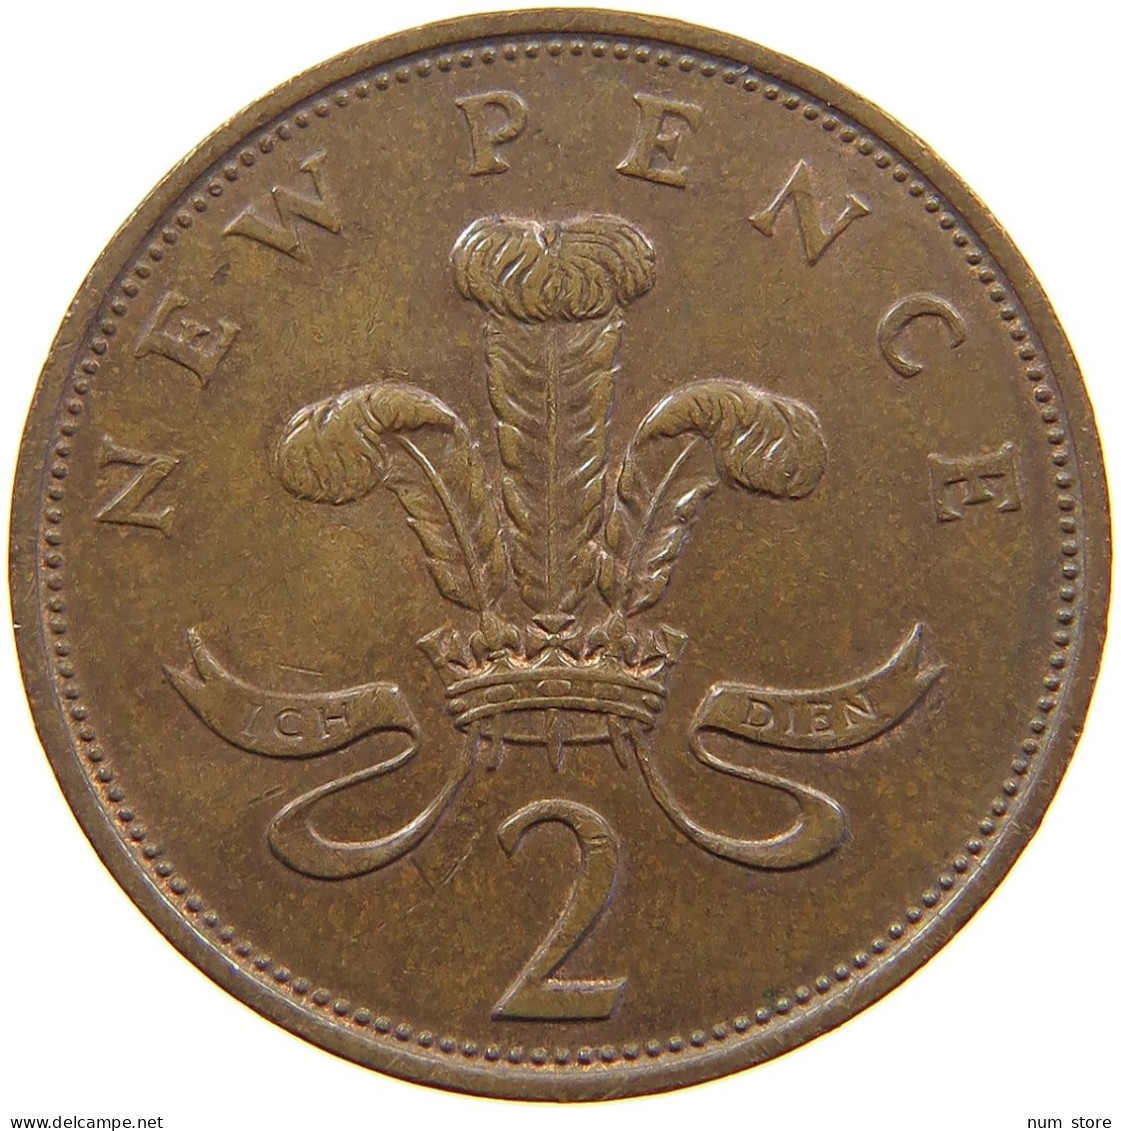 GREAT BRITAIN PENCE 1976 #a066 0191 - 1 Penny & 1 New Penny